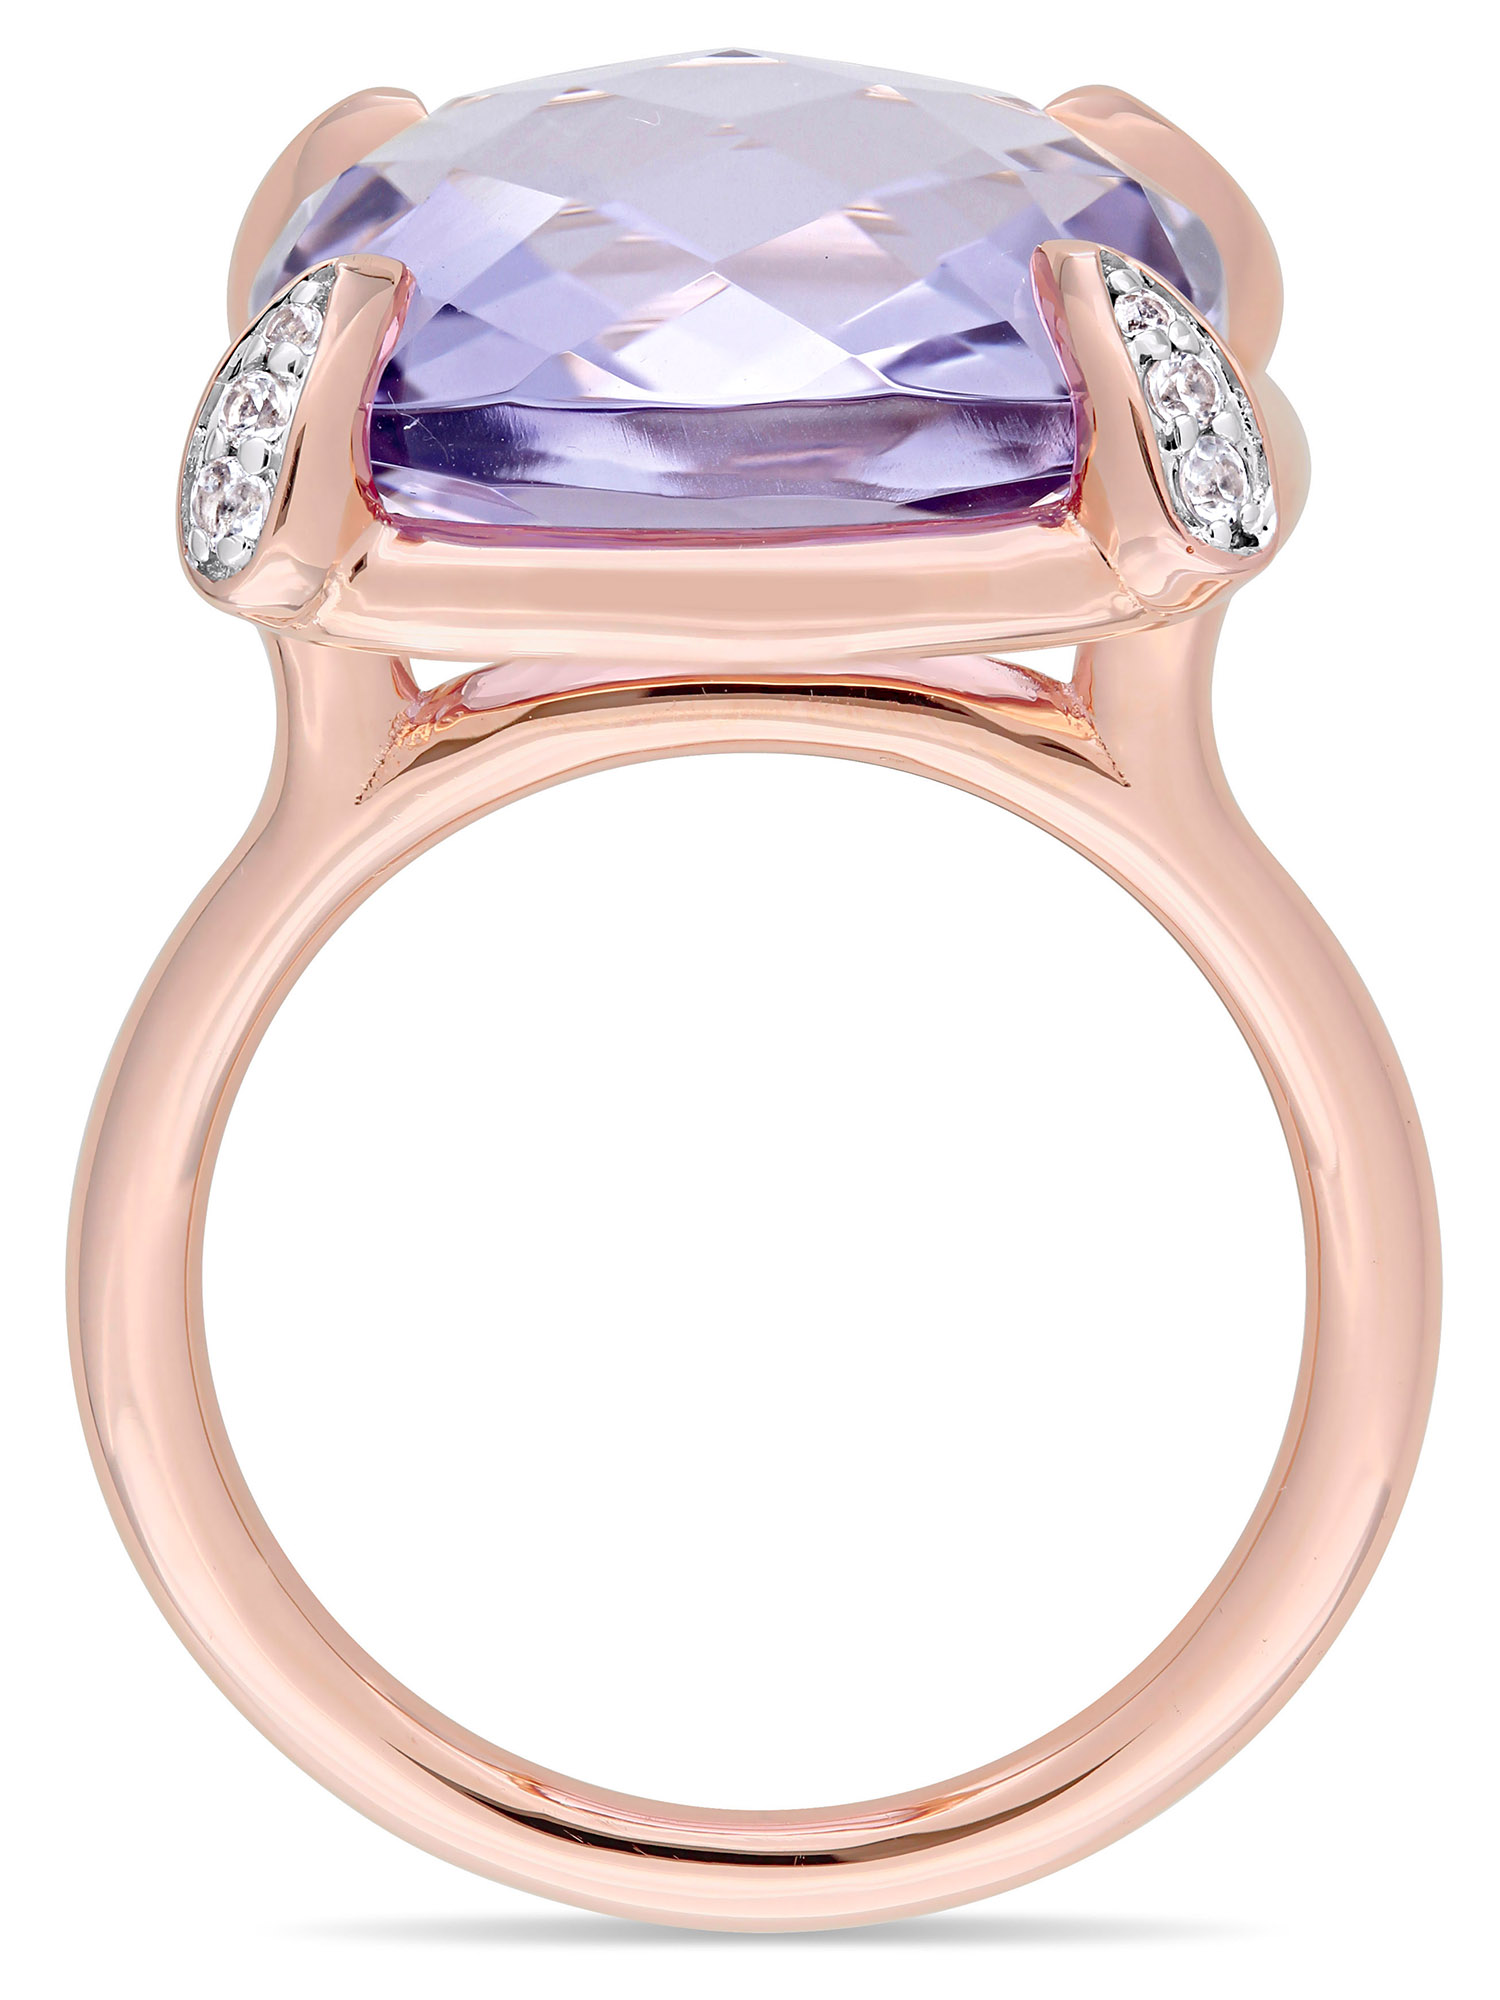 15-1/8 Carat T.G.W. Rose de France and White Sapphire 14kt Rose Gold Cocktail Ring - image 4 of 7